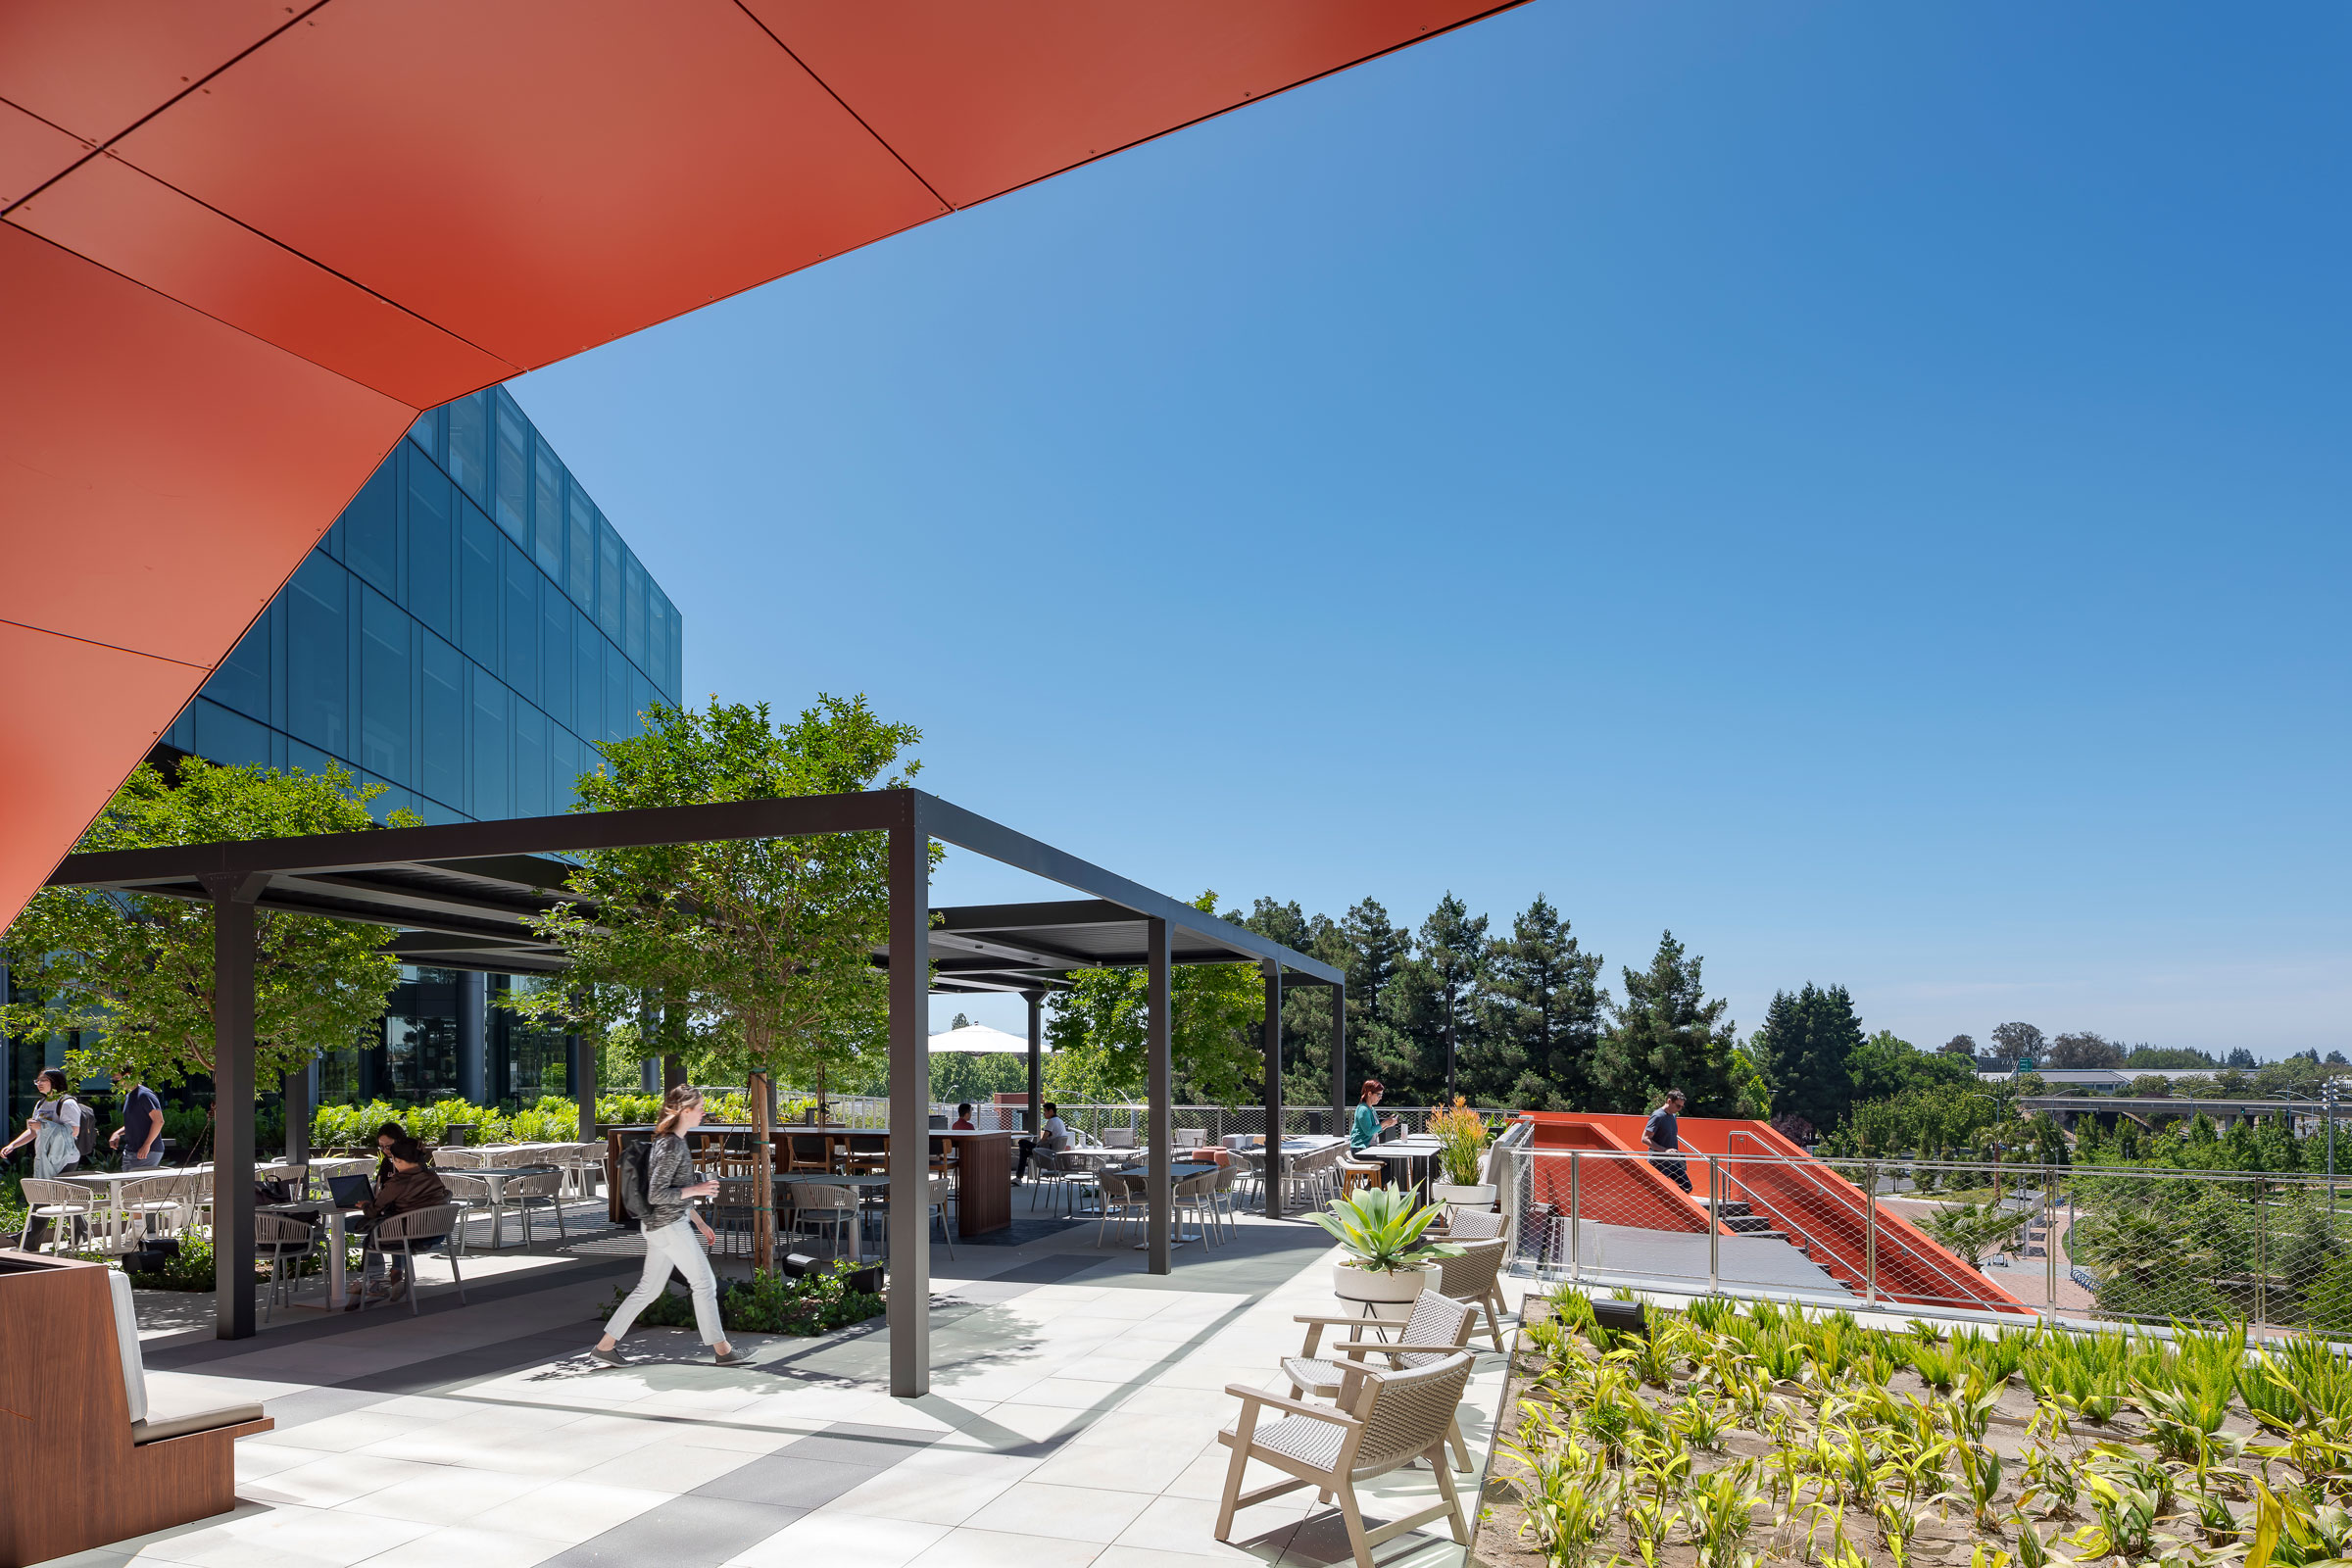 STUDIOS Connects People to Nature at LinkedIn Middlefield Headquarters